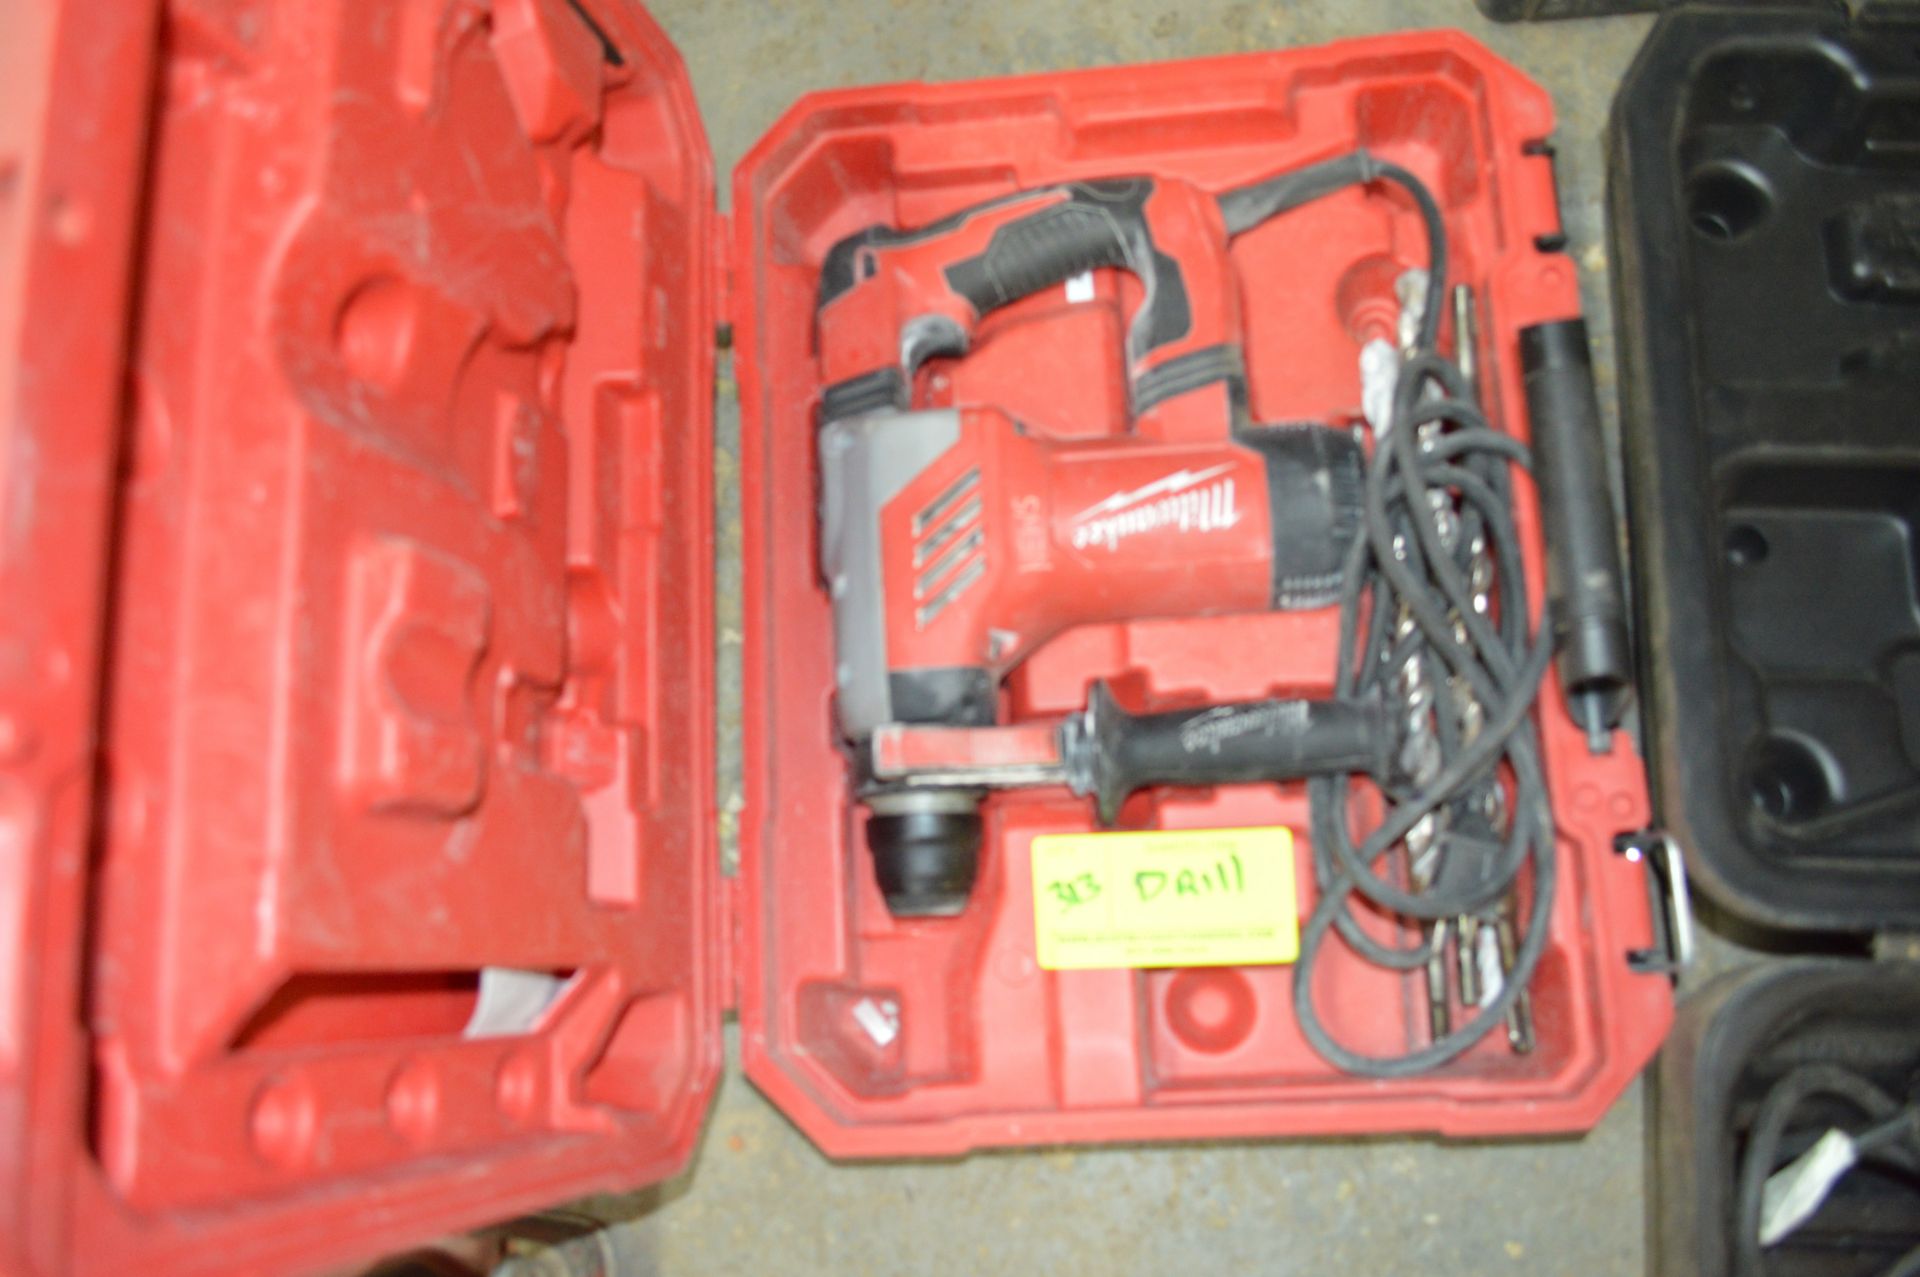 MILWAUKEE HAMMER DRILL AND CASE